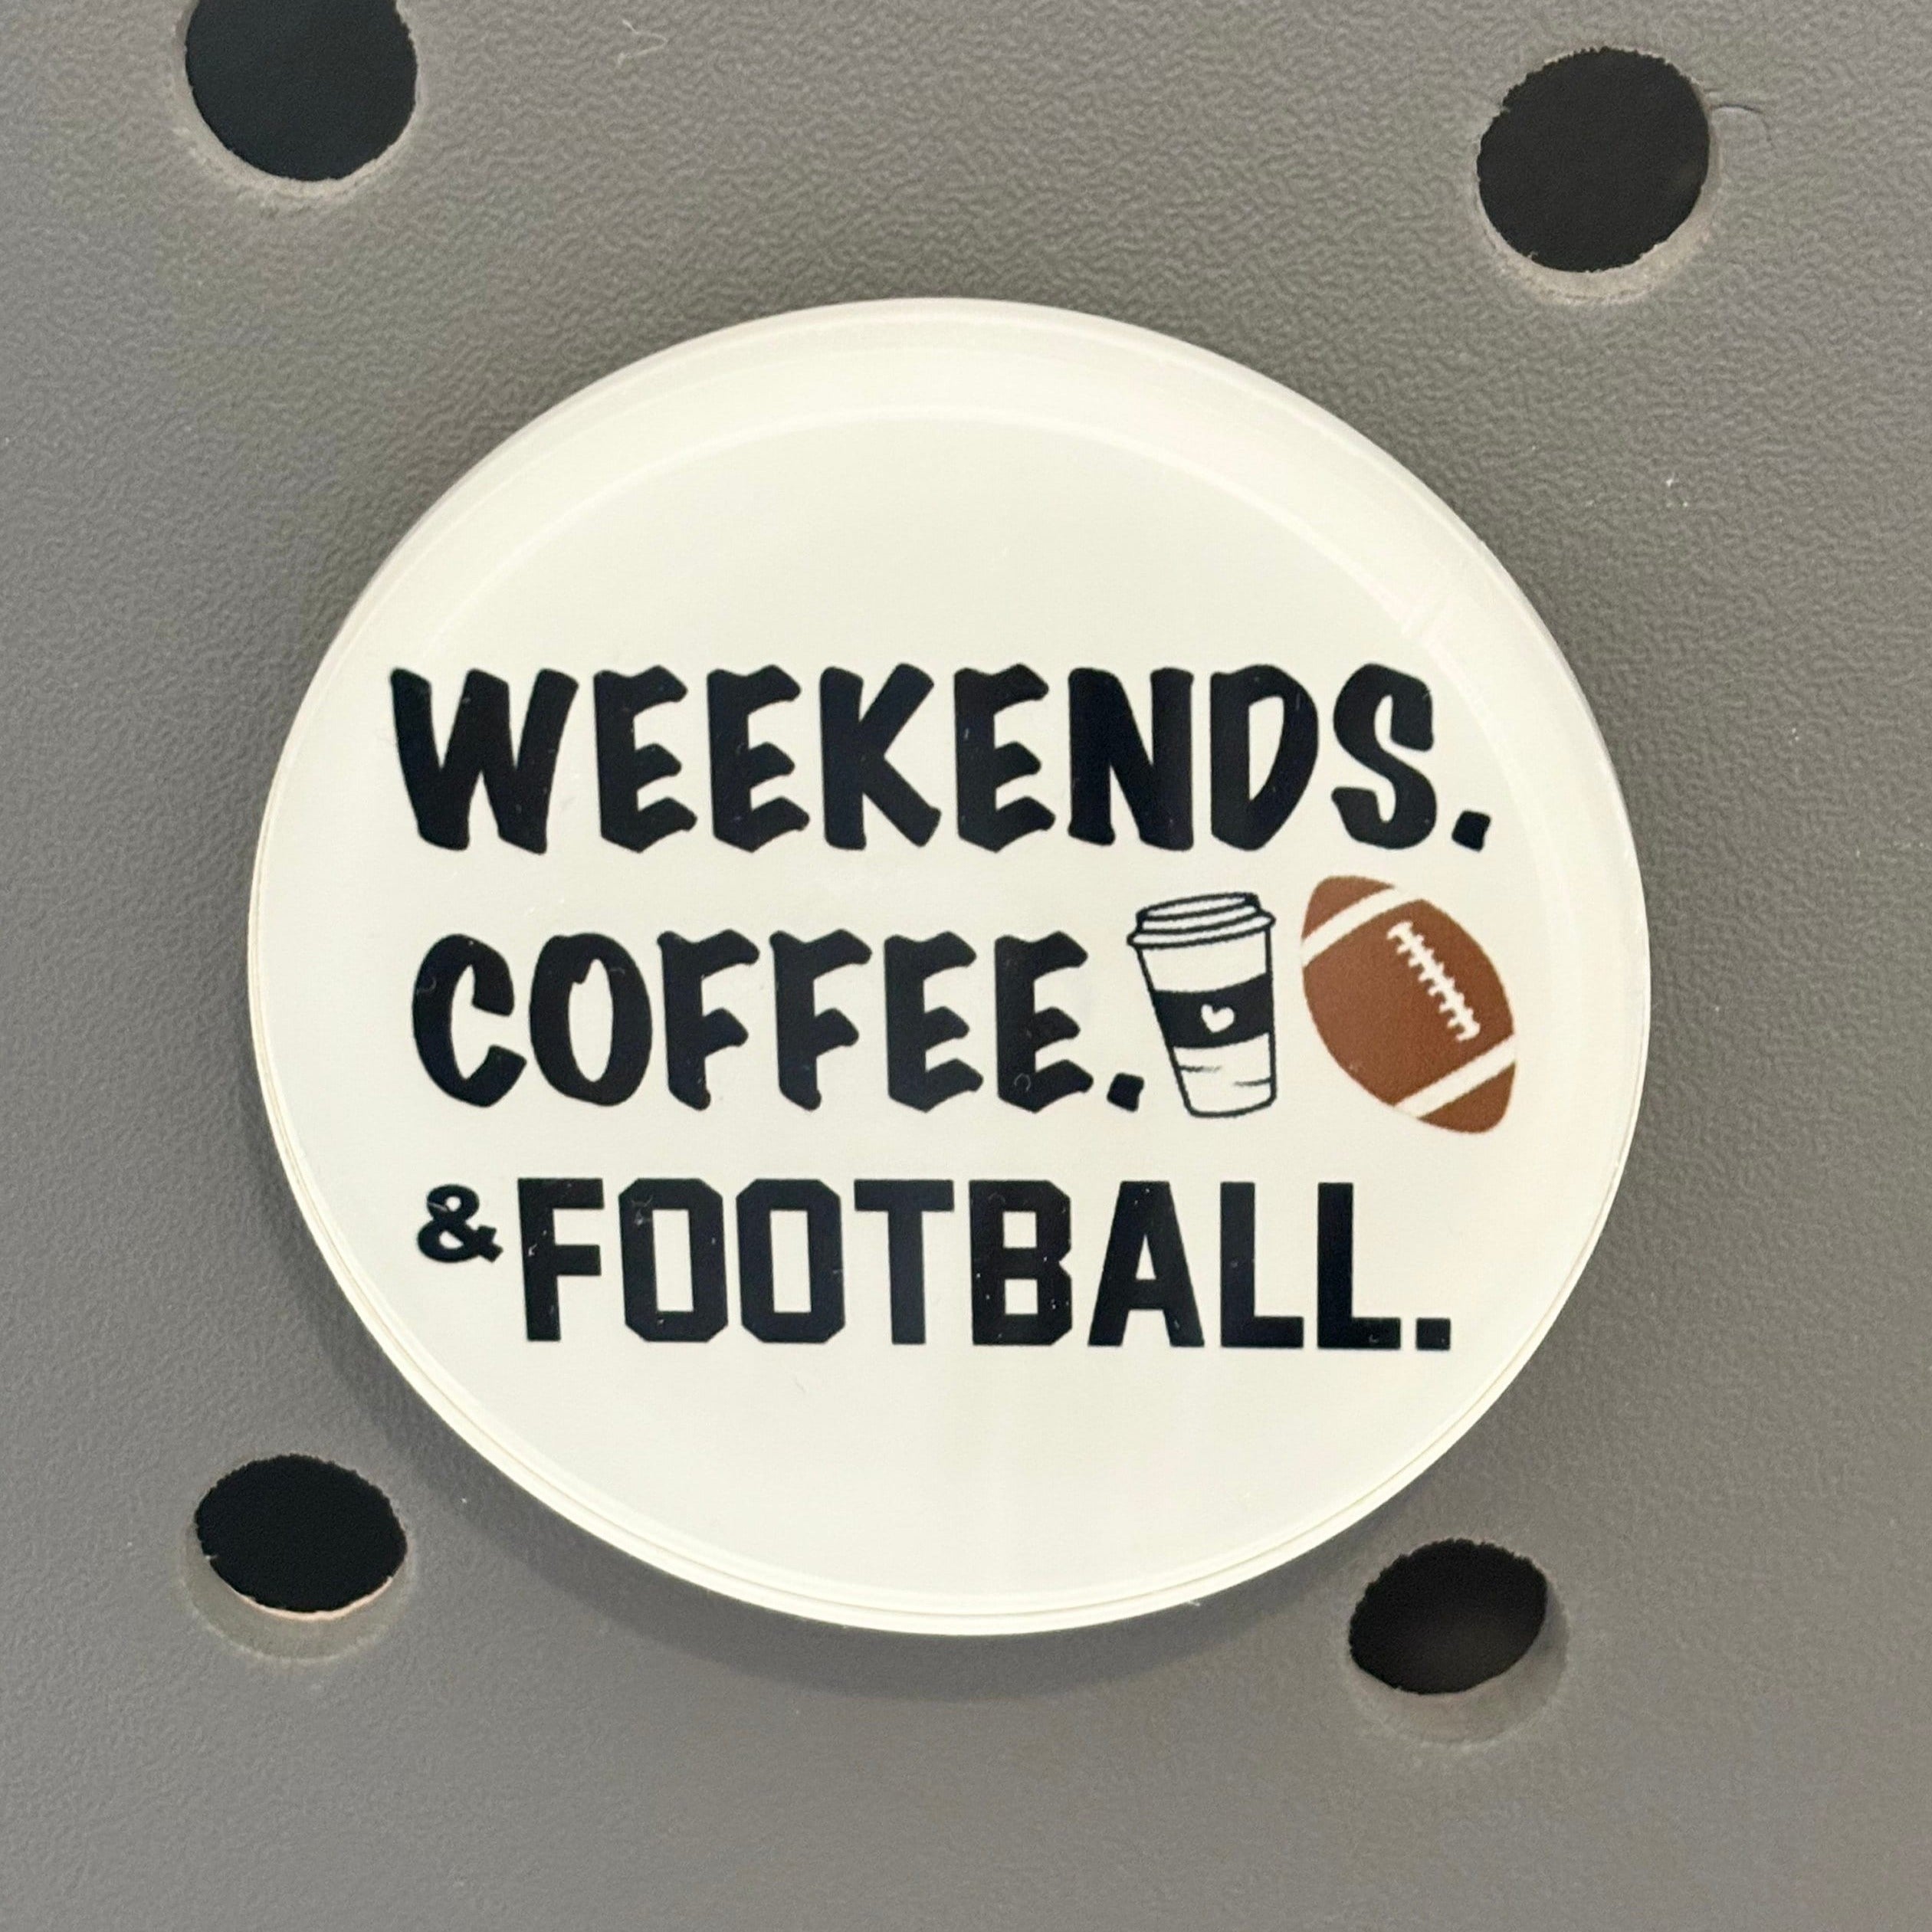 Weekends, Coffee and Football Bogg Charm, Bogg Bag Charm, Custom Bogg Bag Charm, Bogg Bag Accessories